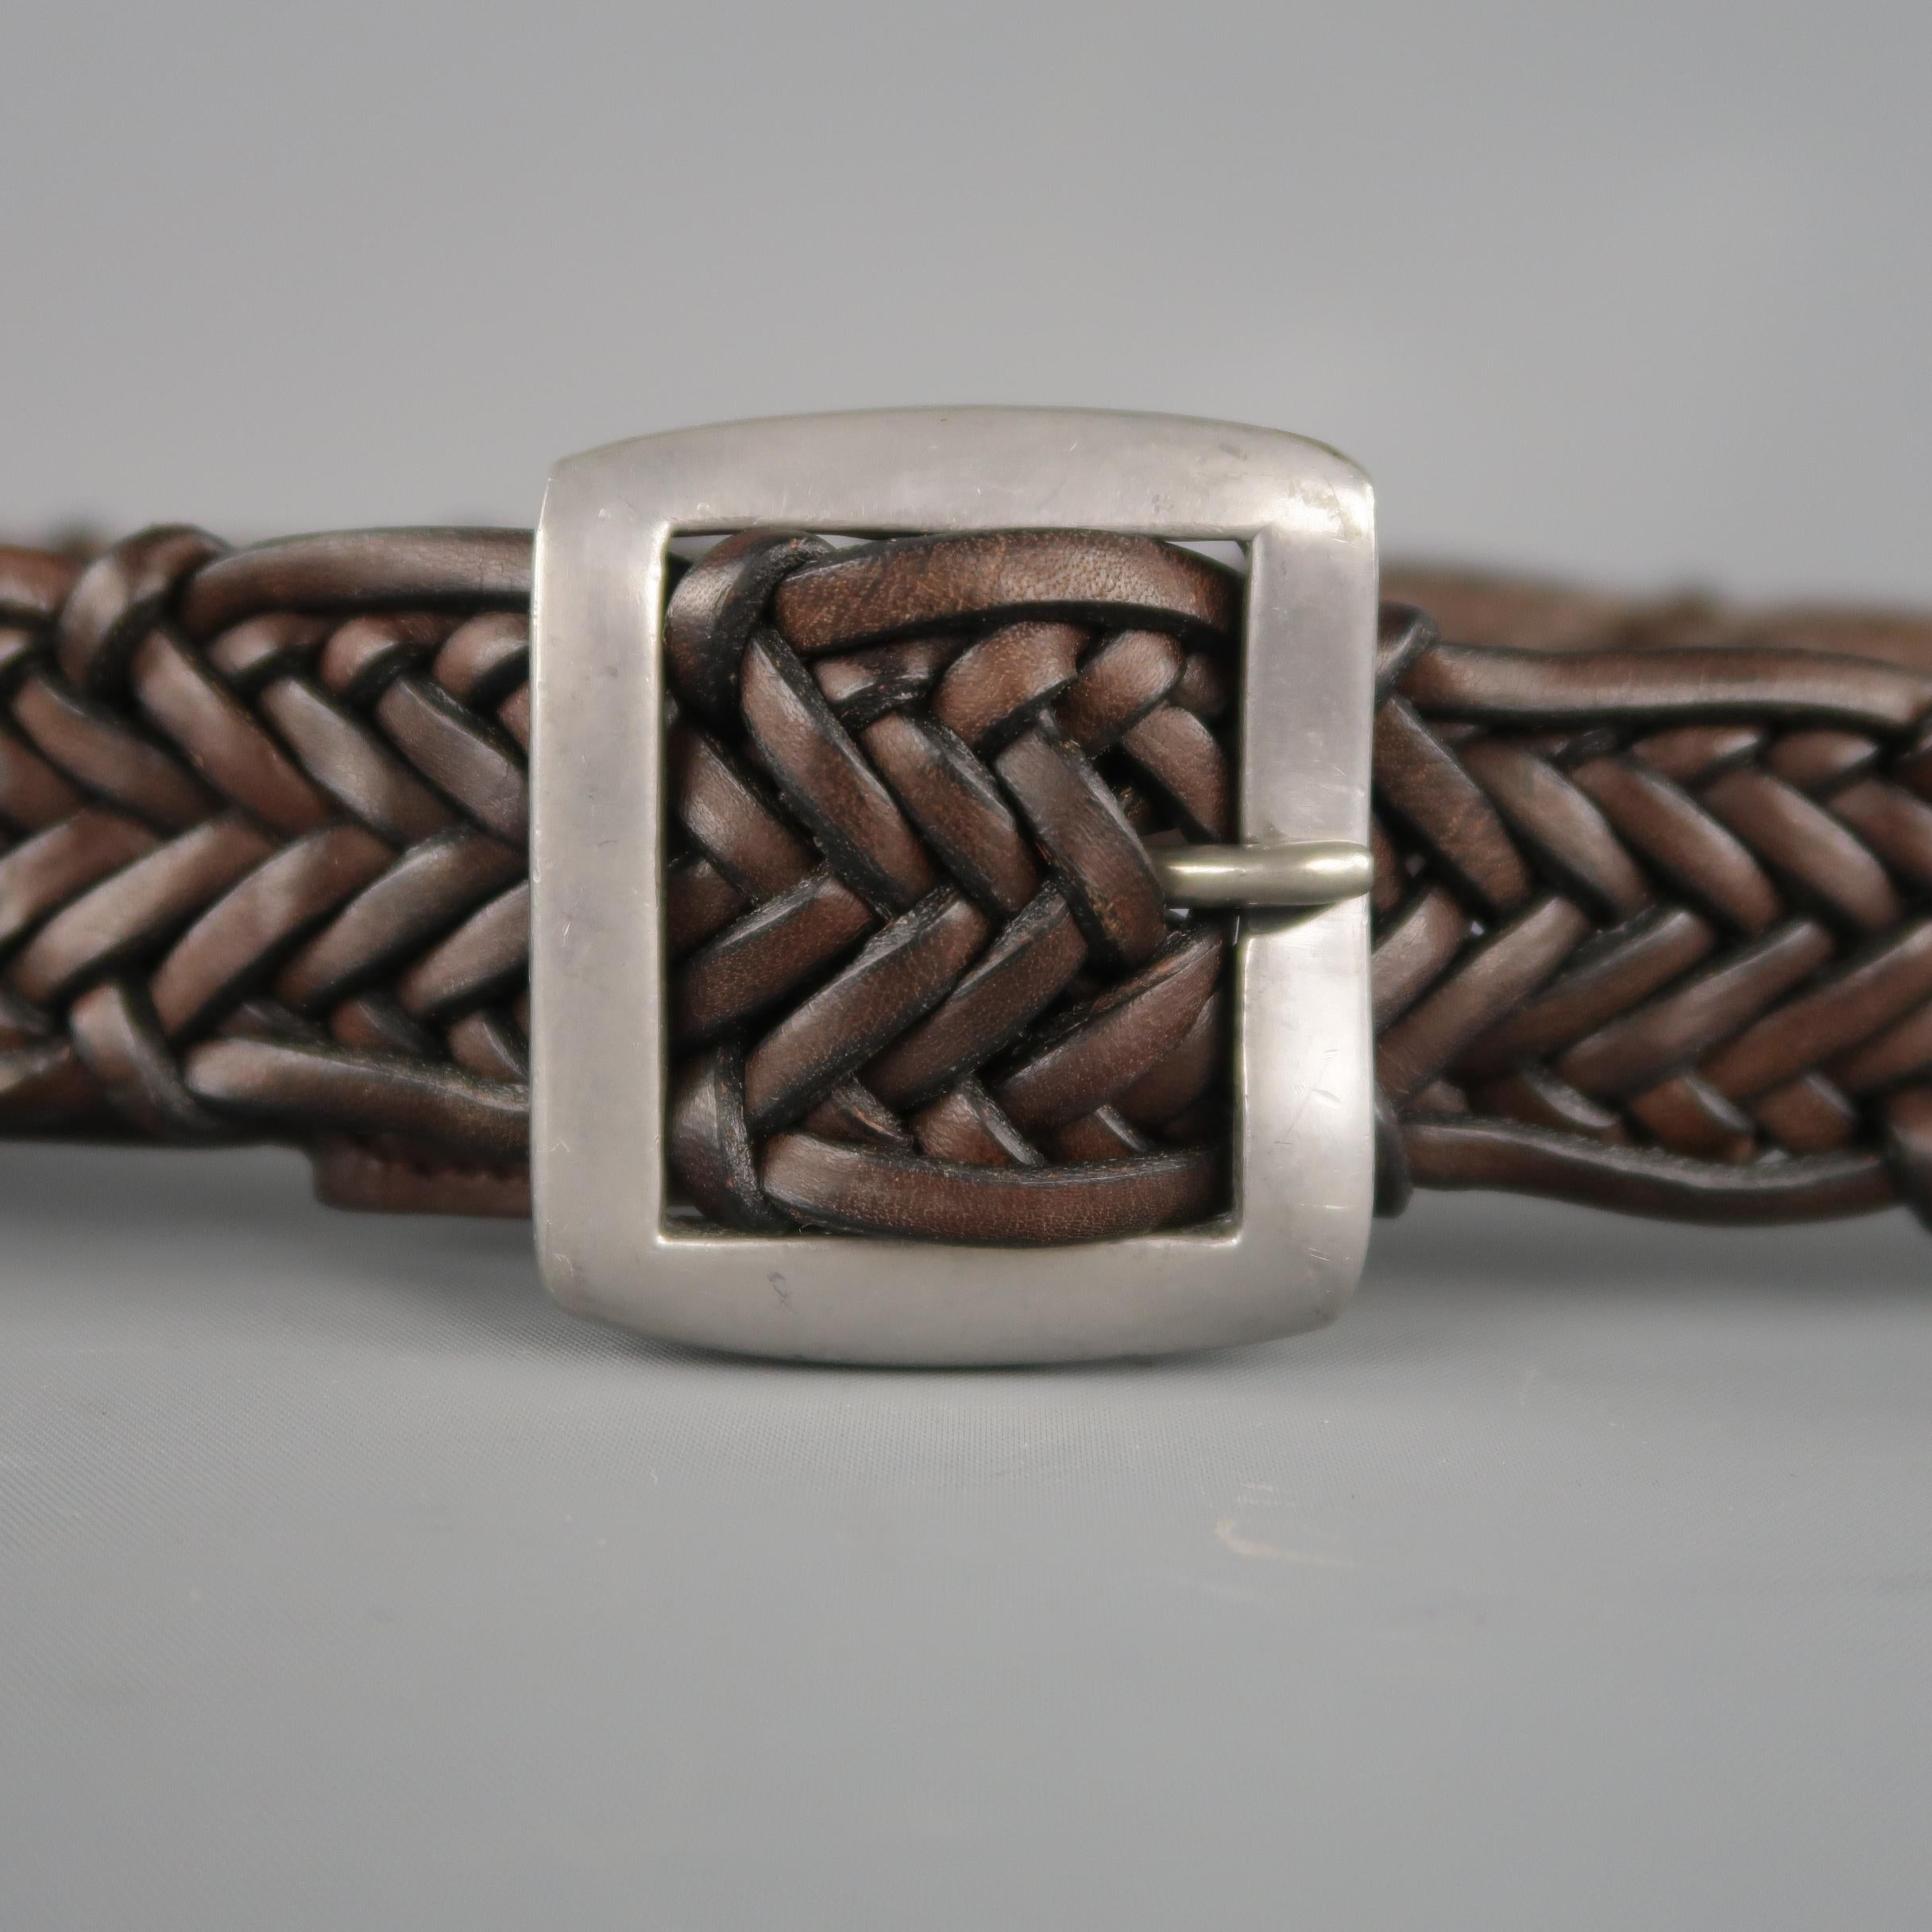 JOHN VARVATOS  belt come in a brown leather braided material, with a silver tone aged metal buckle. Made in England.
 
Excellent Pre-Owned Condition.
Marked M
 
Length: 42.5  in.
Width: 1.5  in.
Fits: up to 38  in.